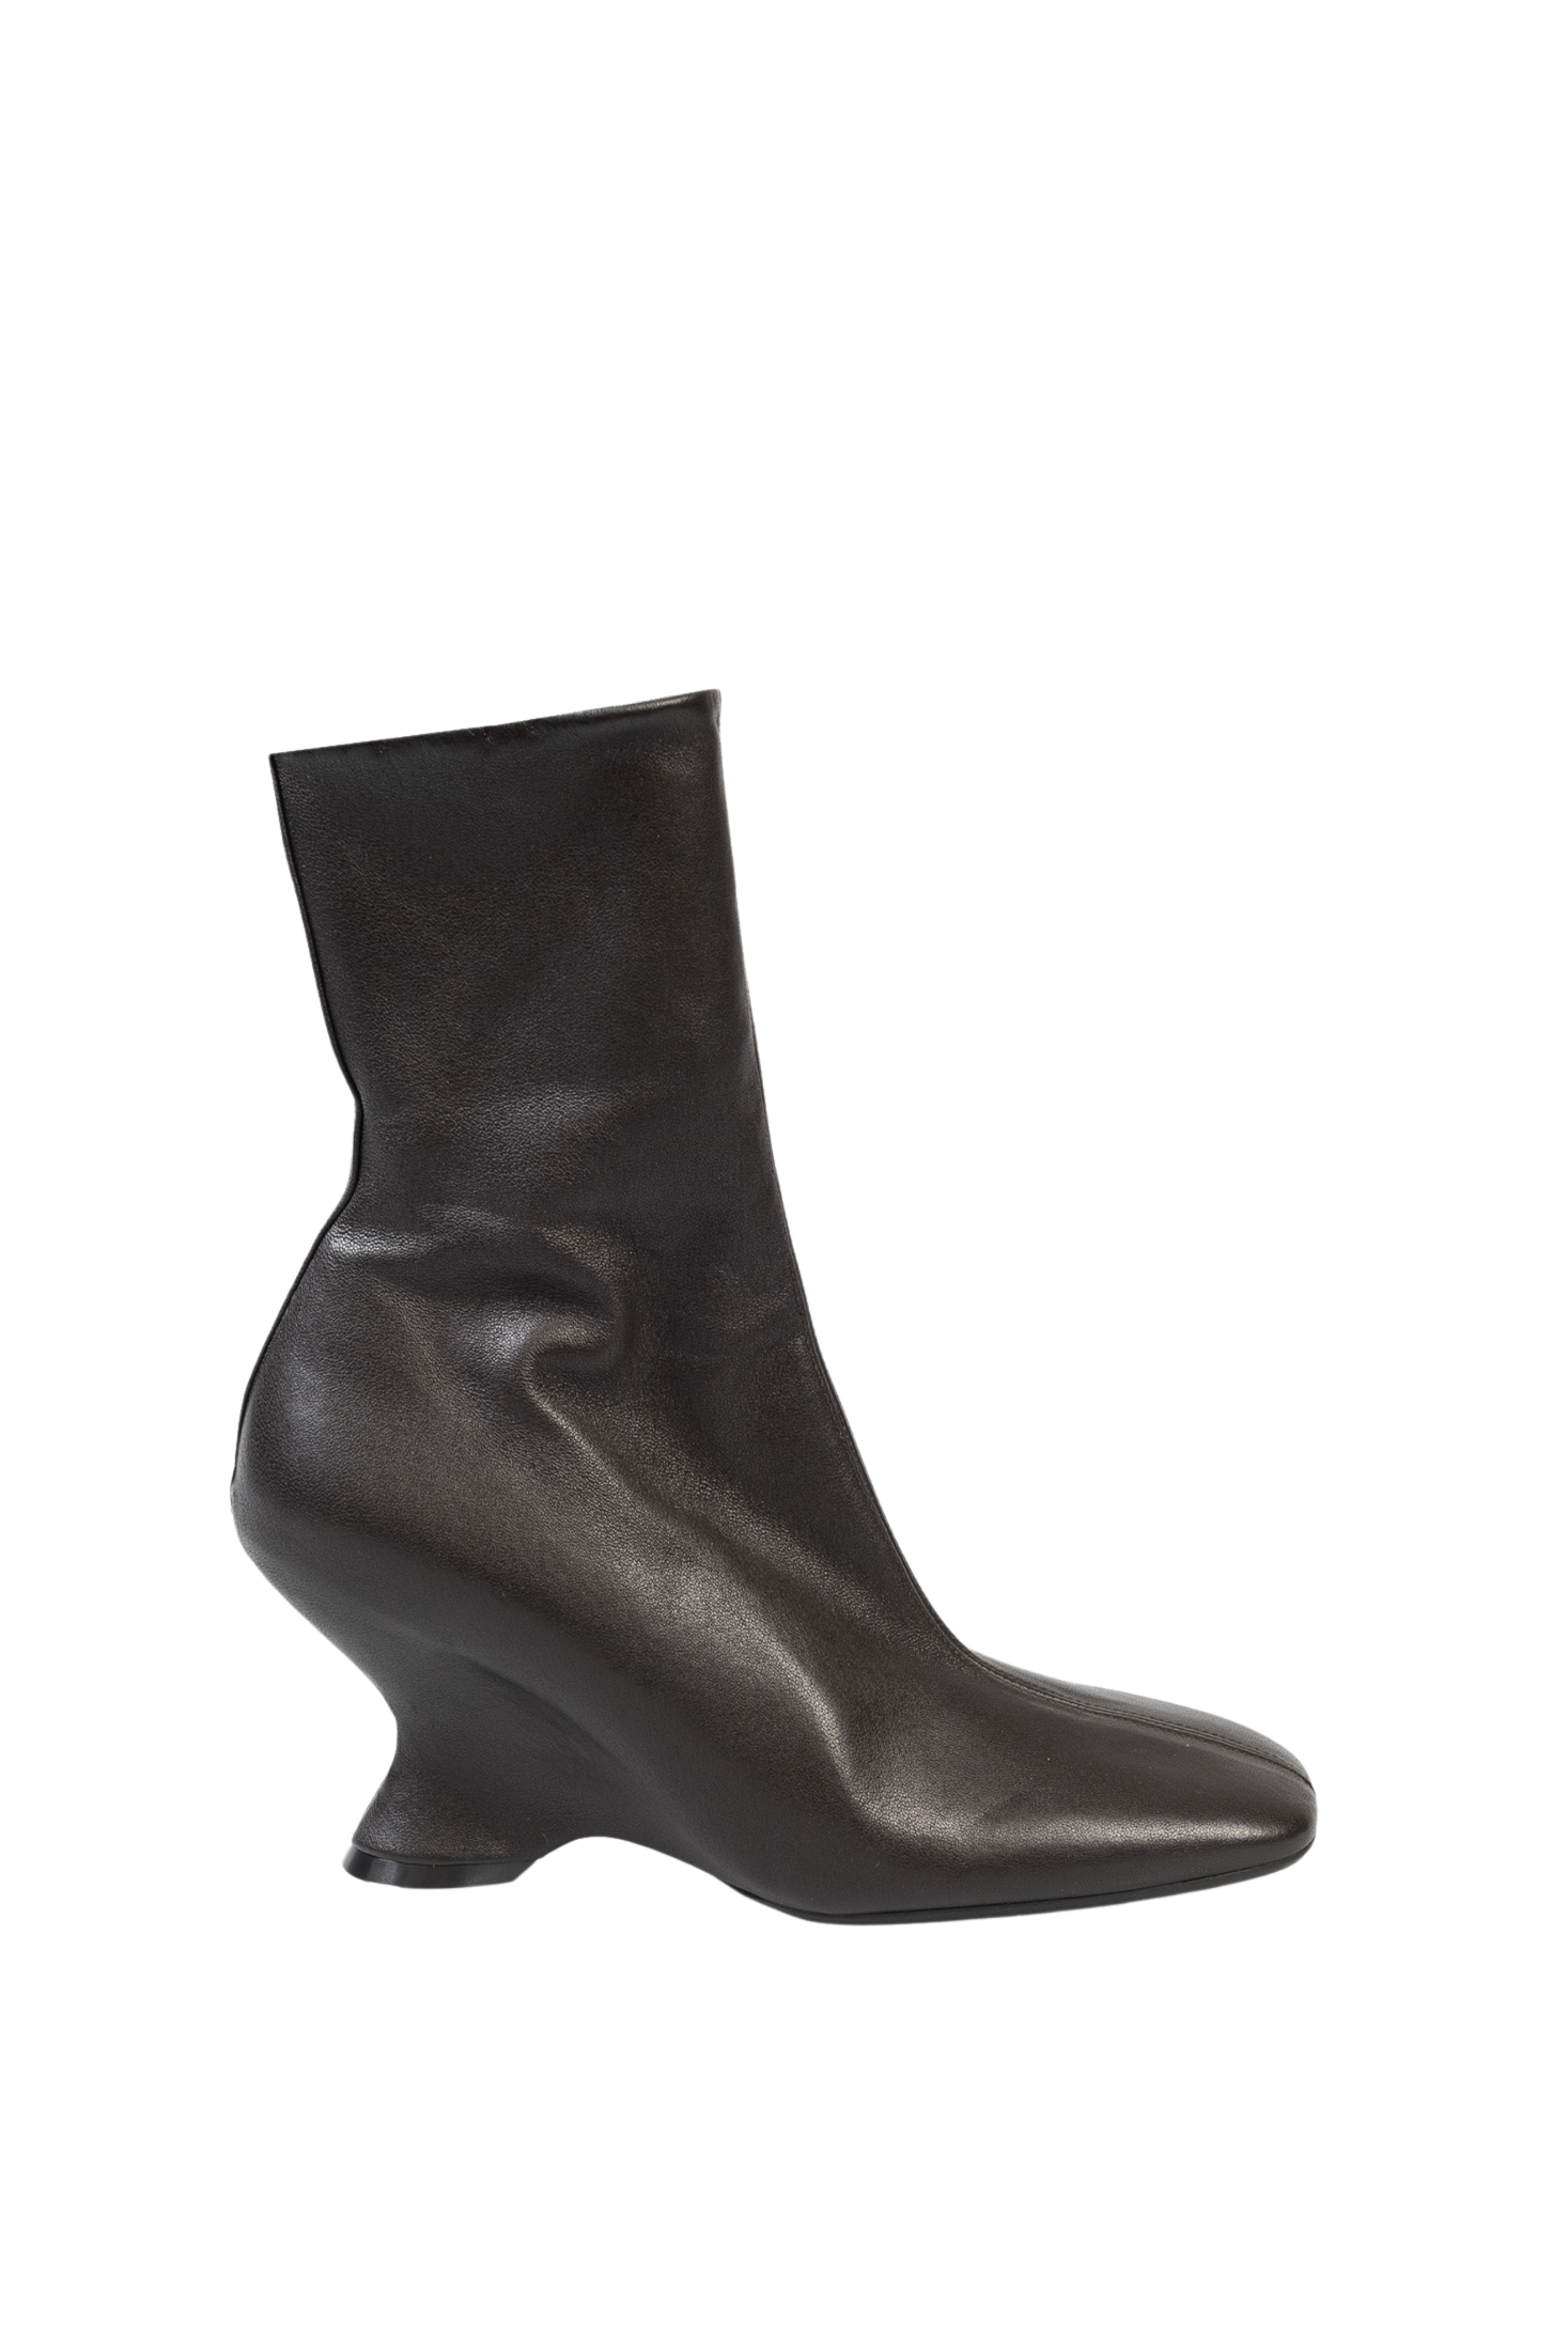 Glove Wedge Stretch Ankle Boot